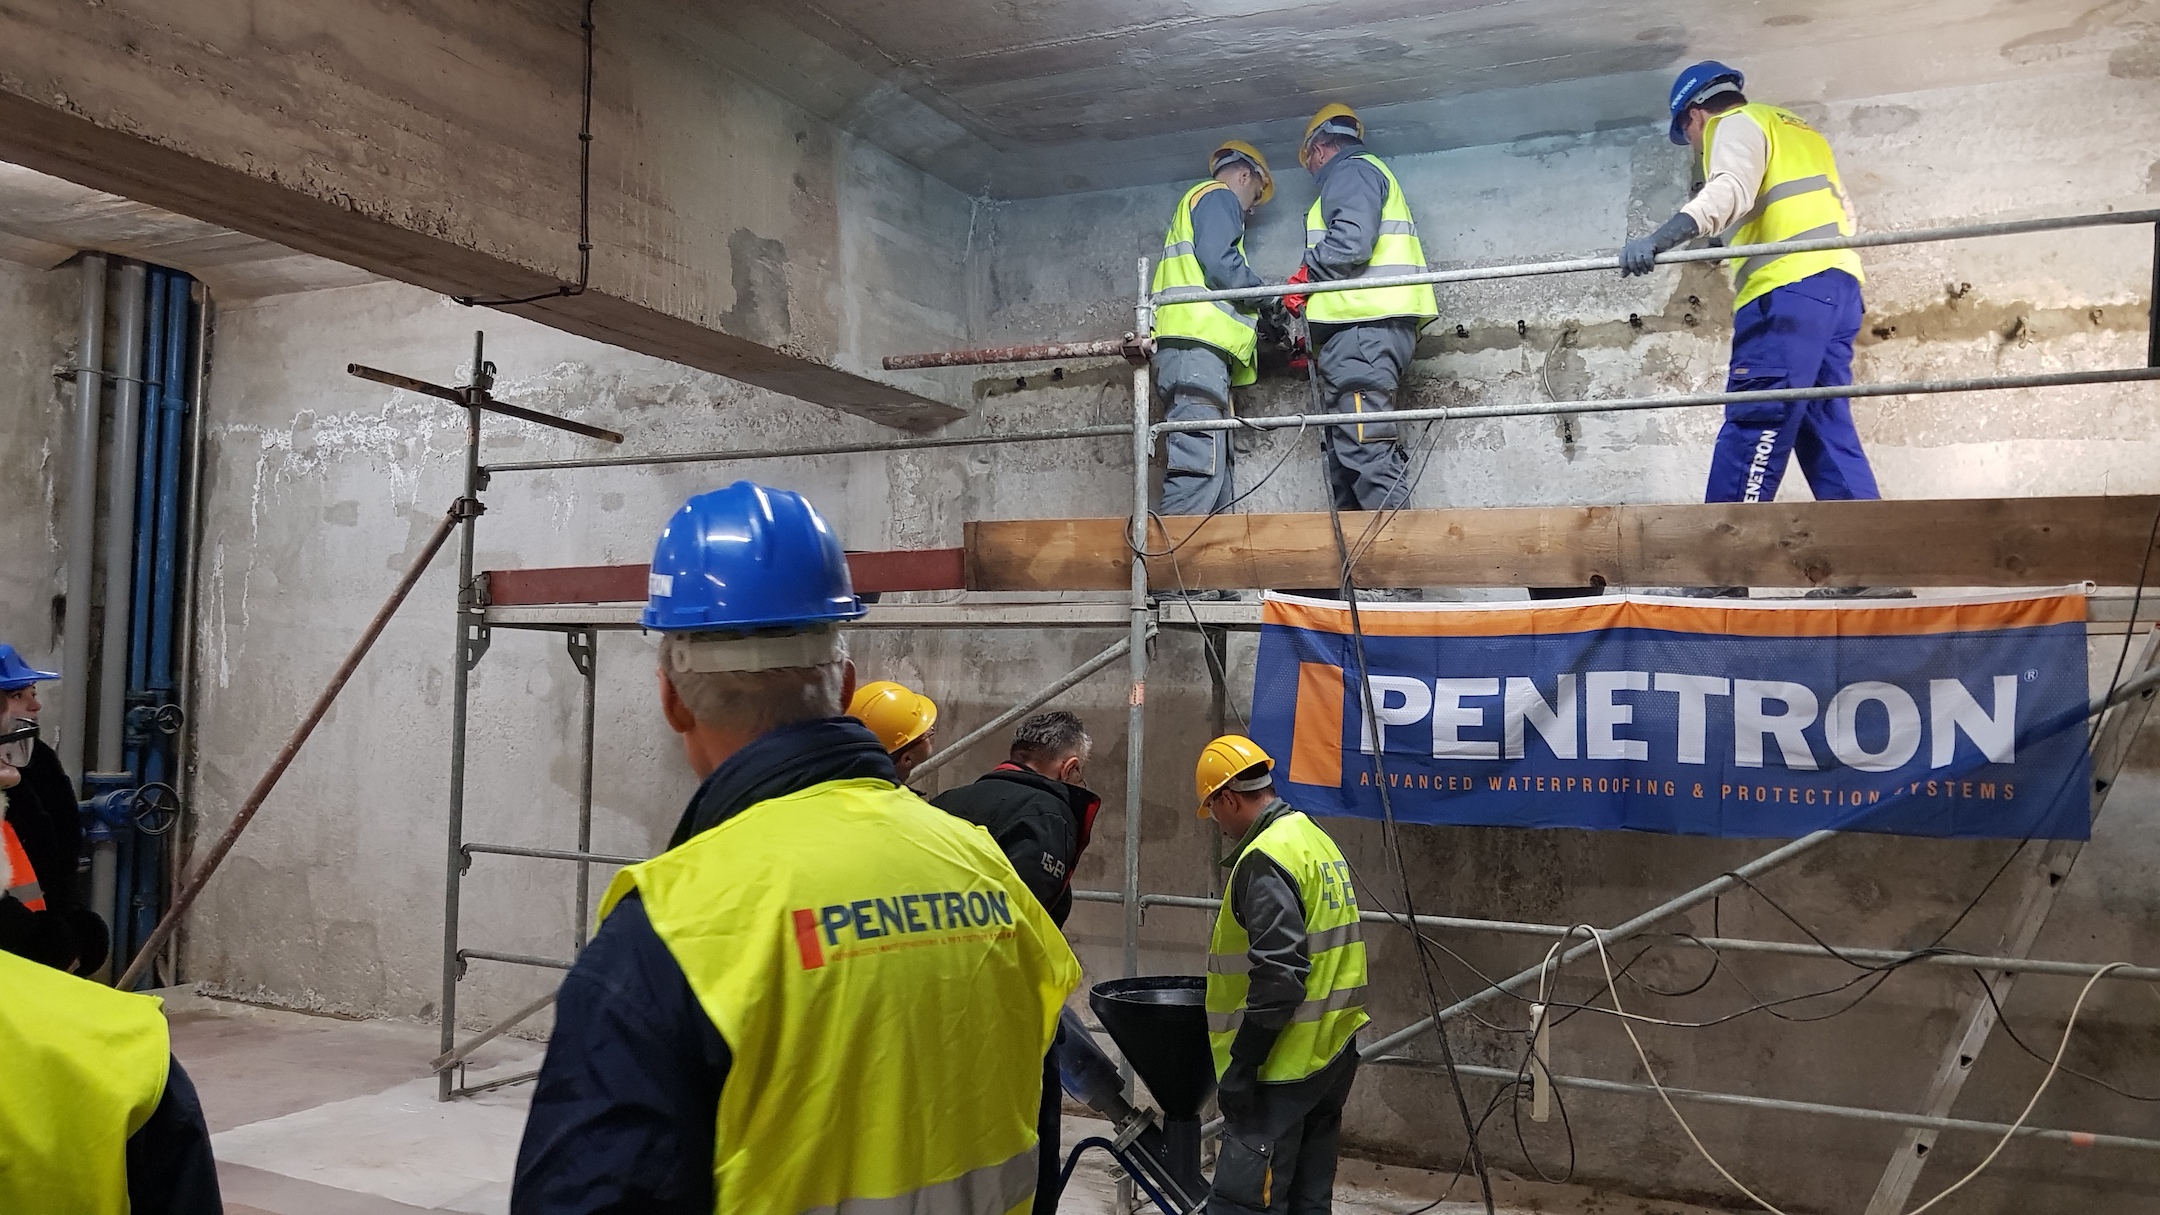 Rejuvenation treatment: PENETRON INJECT, a crystalline-based grout, was injected into the Iron Gate I Power Station’s concrete matrix to fill out and seal deeply embedded voids, cracks and fissures.